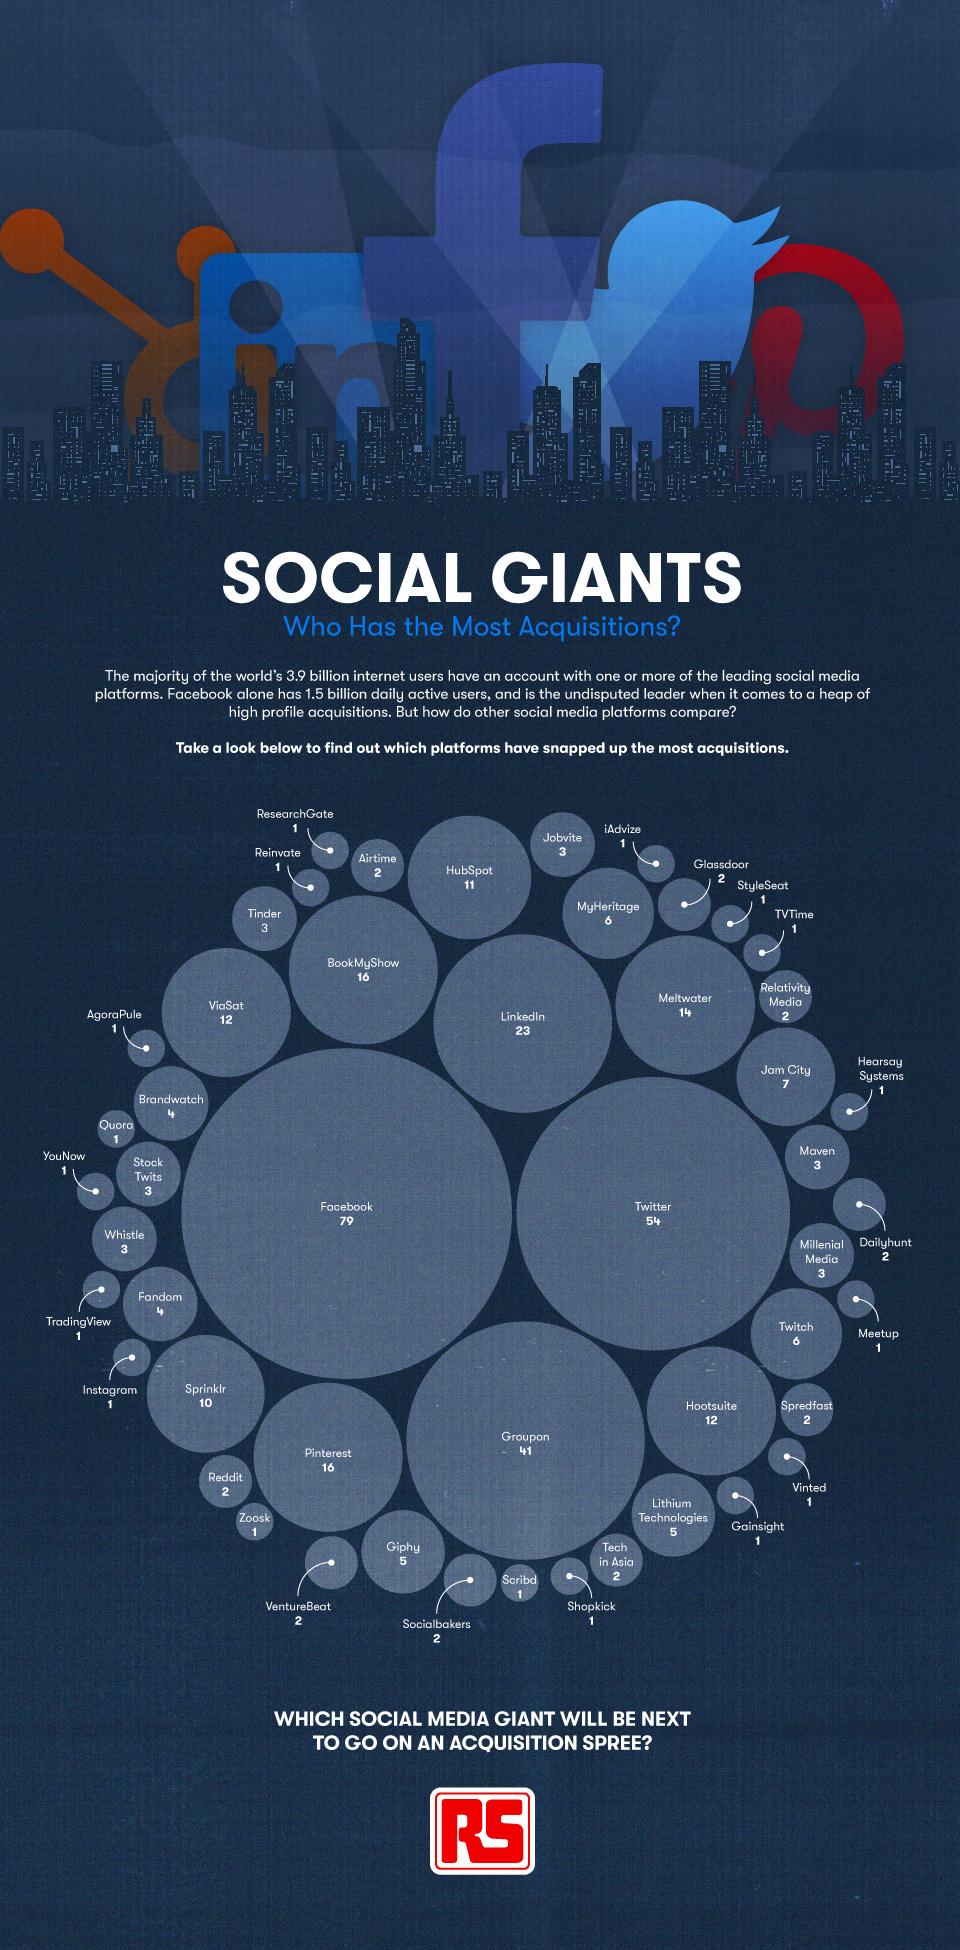 Social Giants: Who Has the Most Acquisitions? Infographic